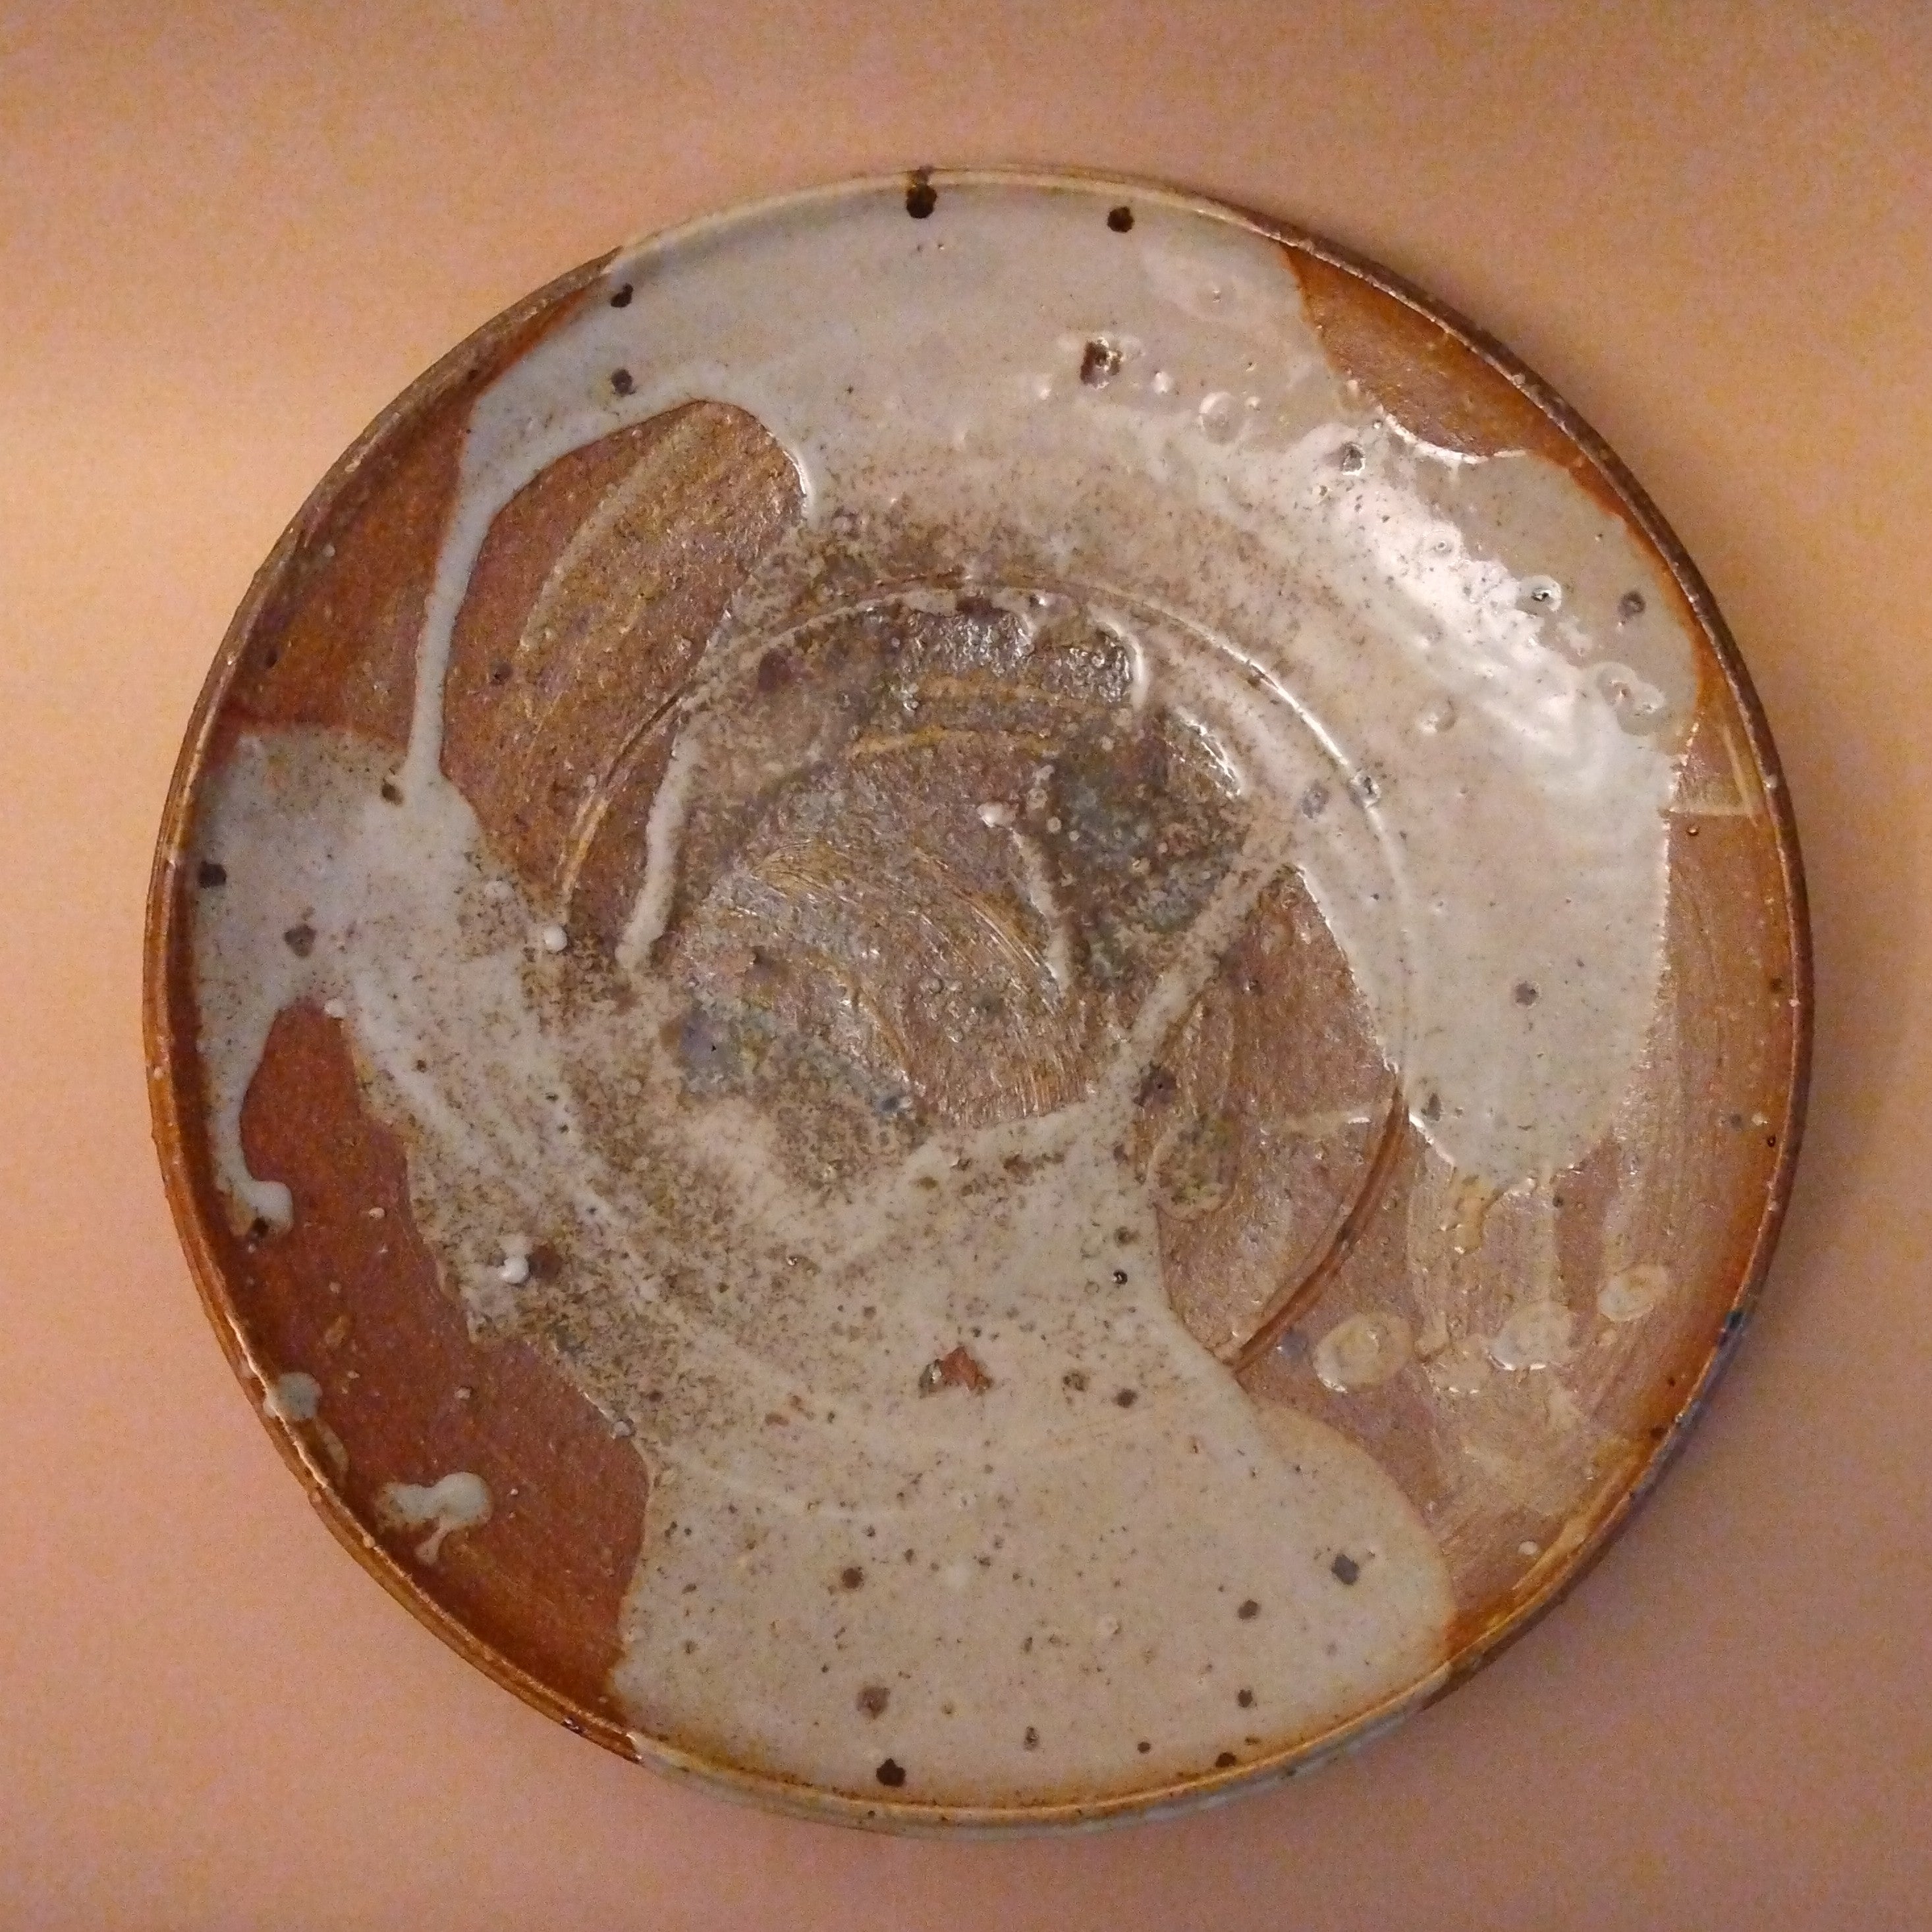 Wood-fired Plate with Shino Glaze Ladle Splashes, by George Gledhill